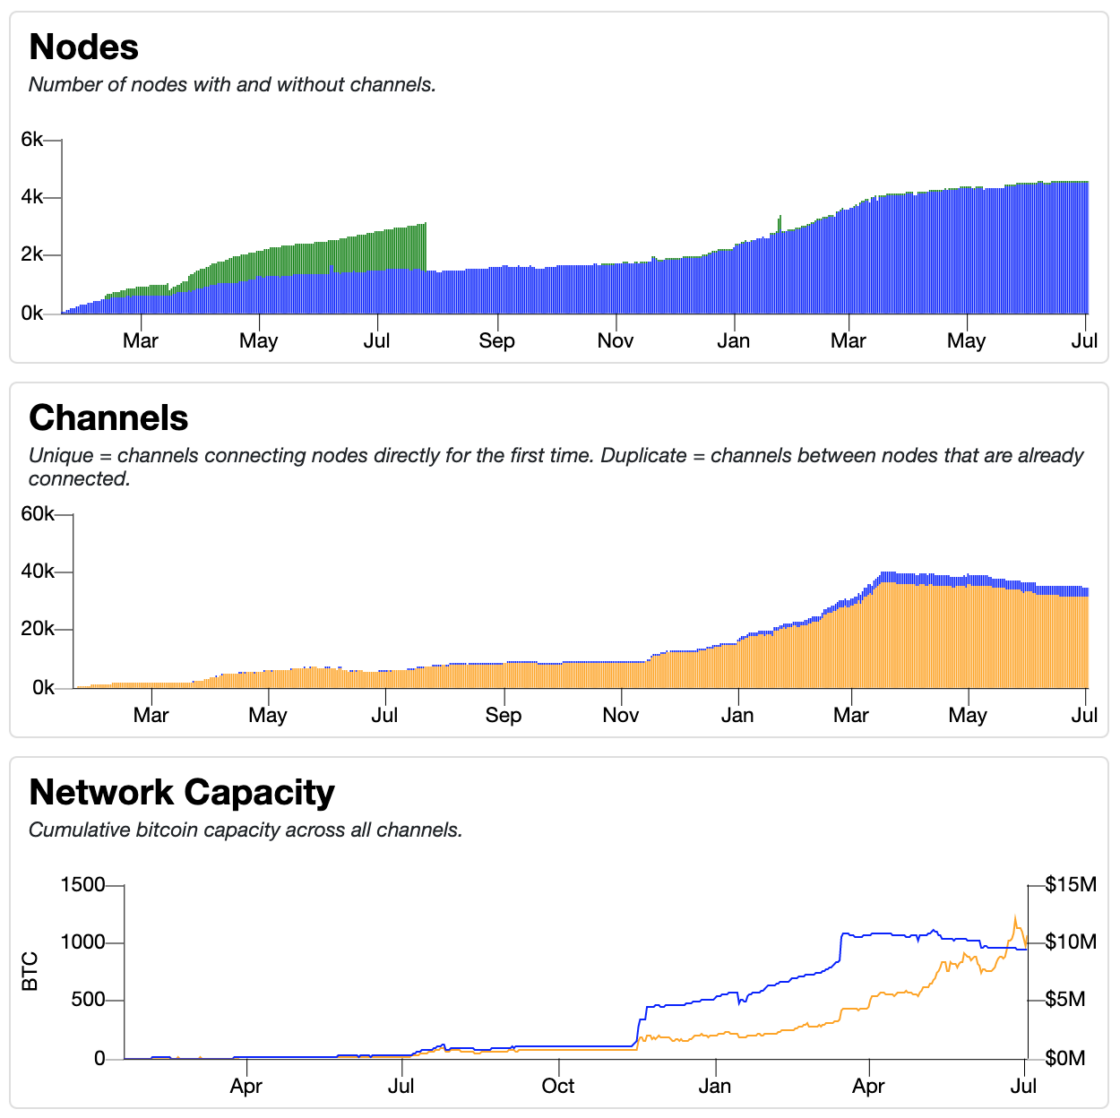 Node Count, Channels, and Network Capacity